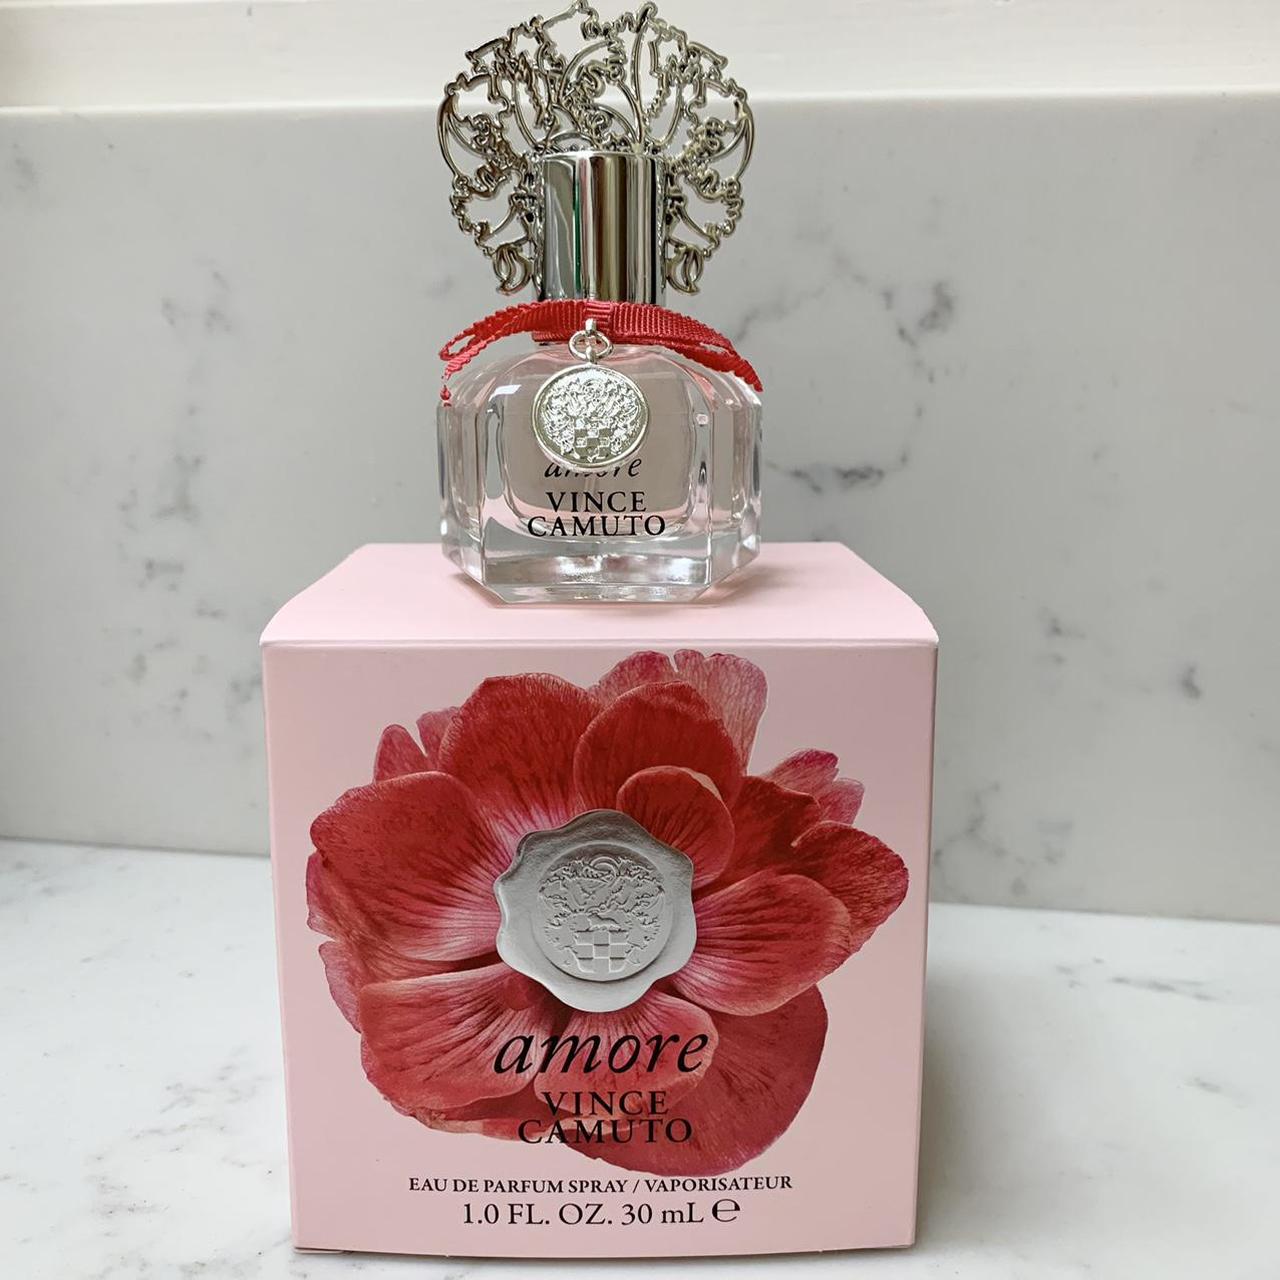 Vince Camuto Amore Perfume for Women in Canada –